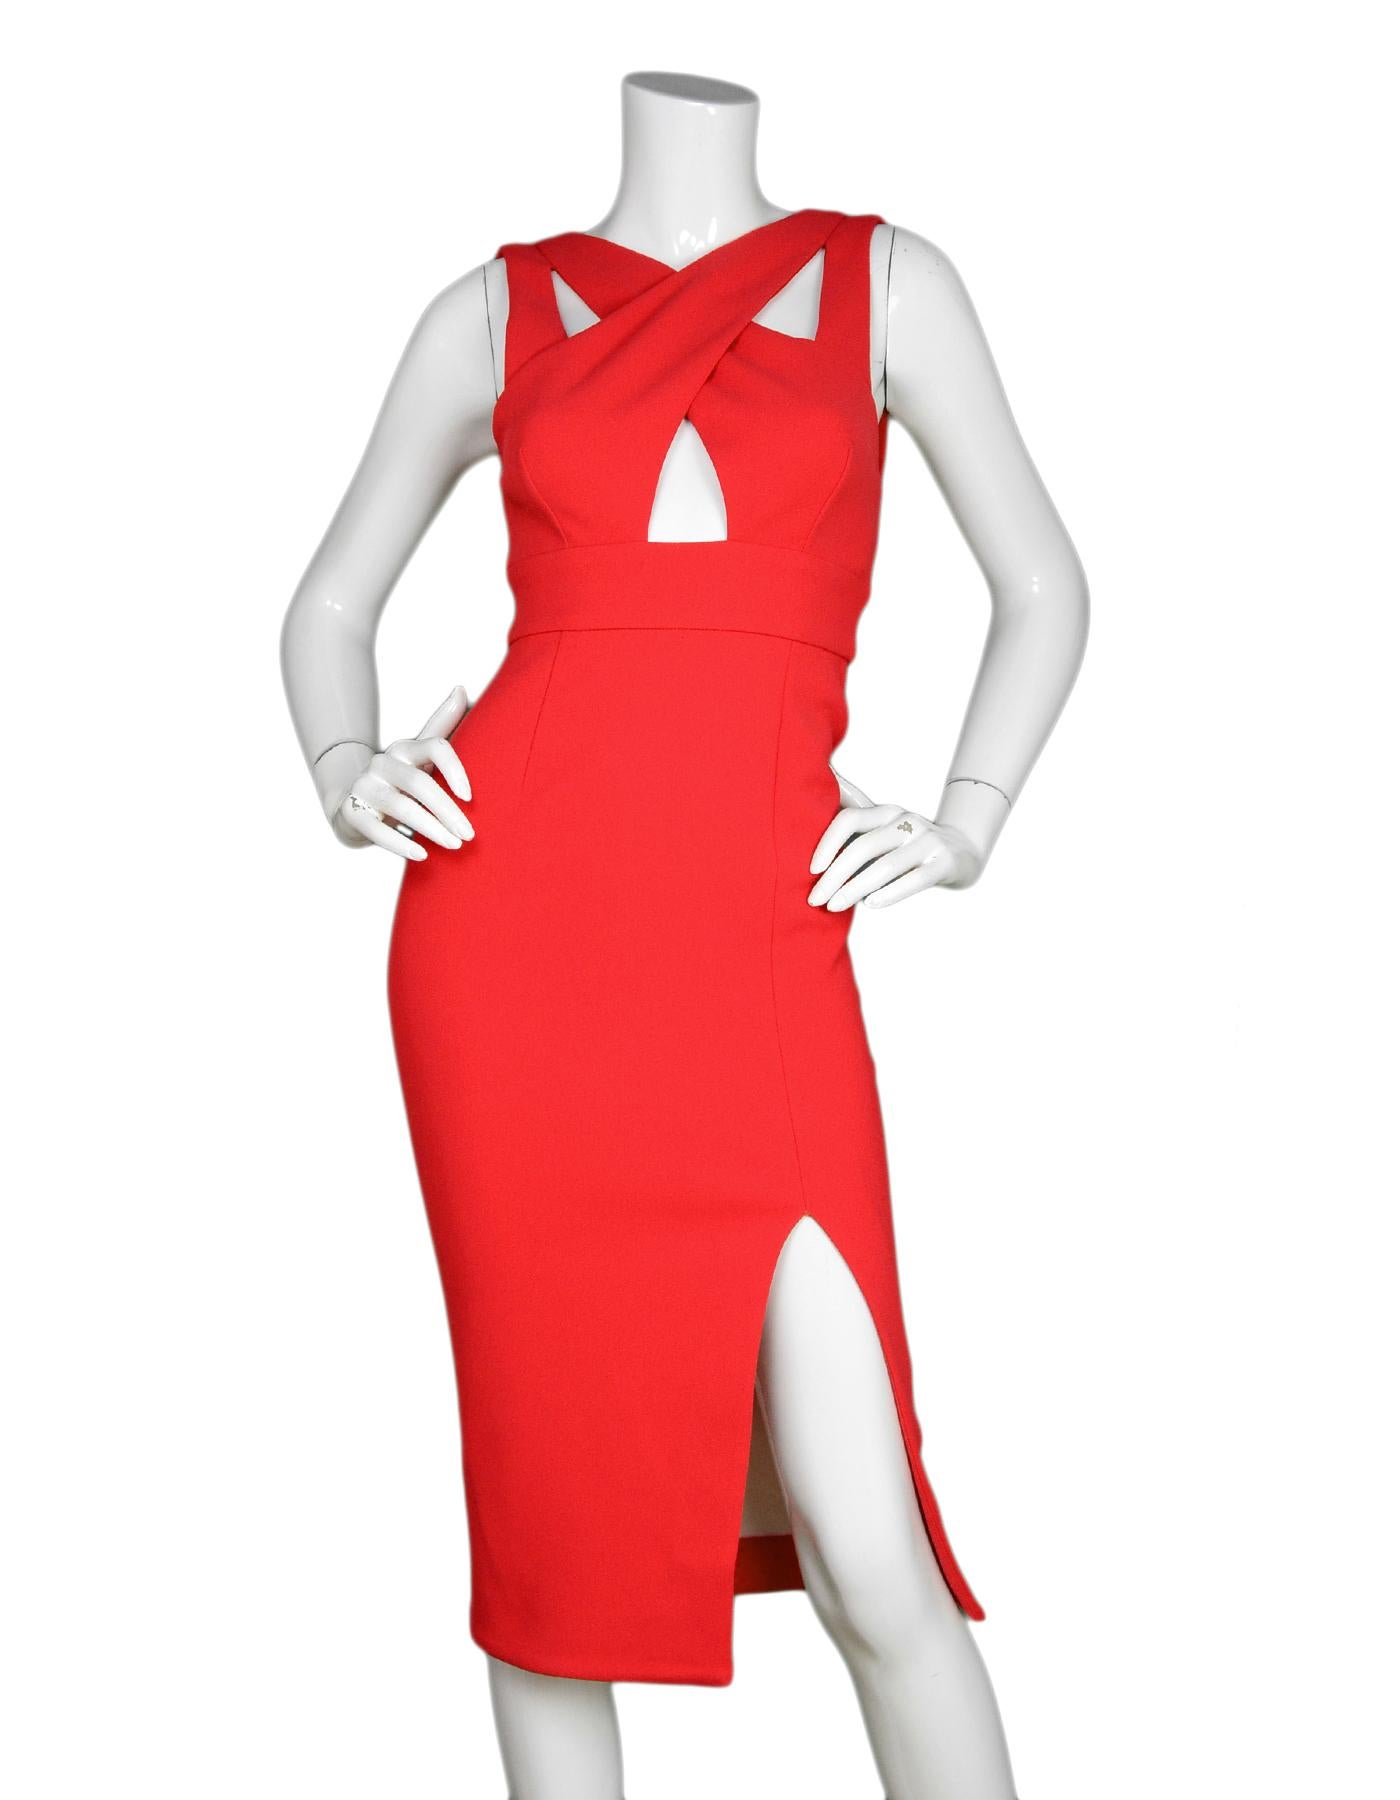 Nicholas Poppy Red Bonded Crepe Double Criss Cross Sleeveless Dress Sz 2 NWT

Made In:  Australia 
Color: Poppy red
Materials: 100% polyester 
Lining: 66% rayon, 29% nylon, 5% spandex
Opening/Closure: Exposed silvertone back zipper
Overall